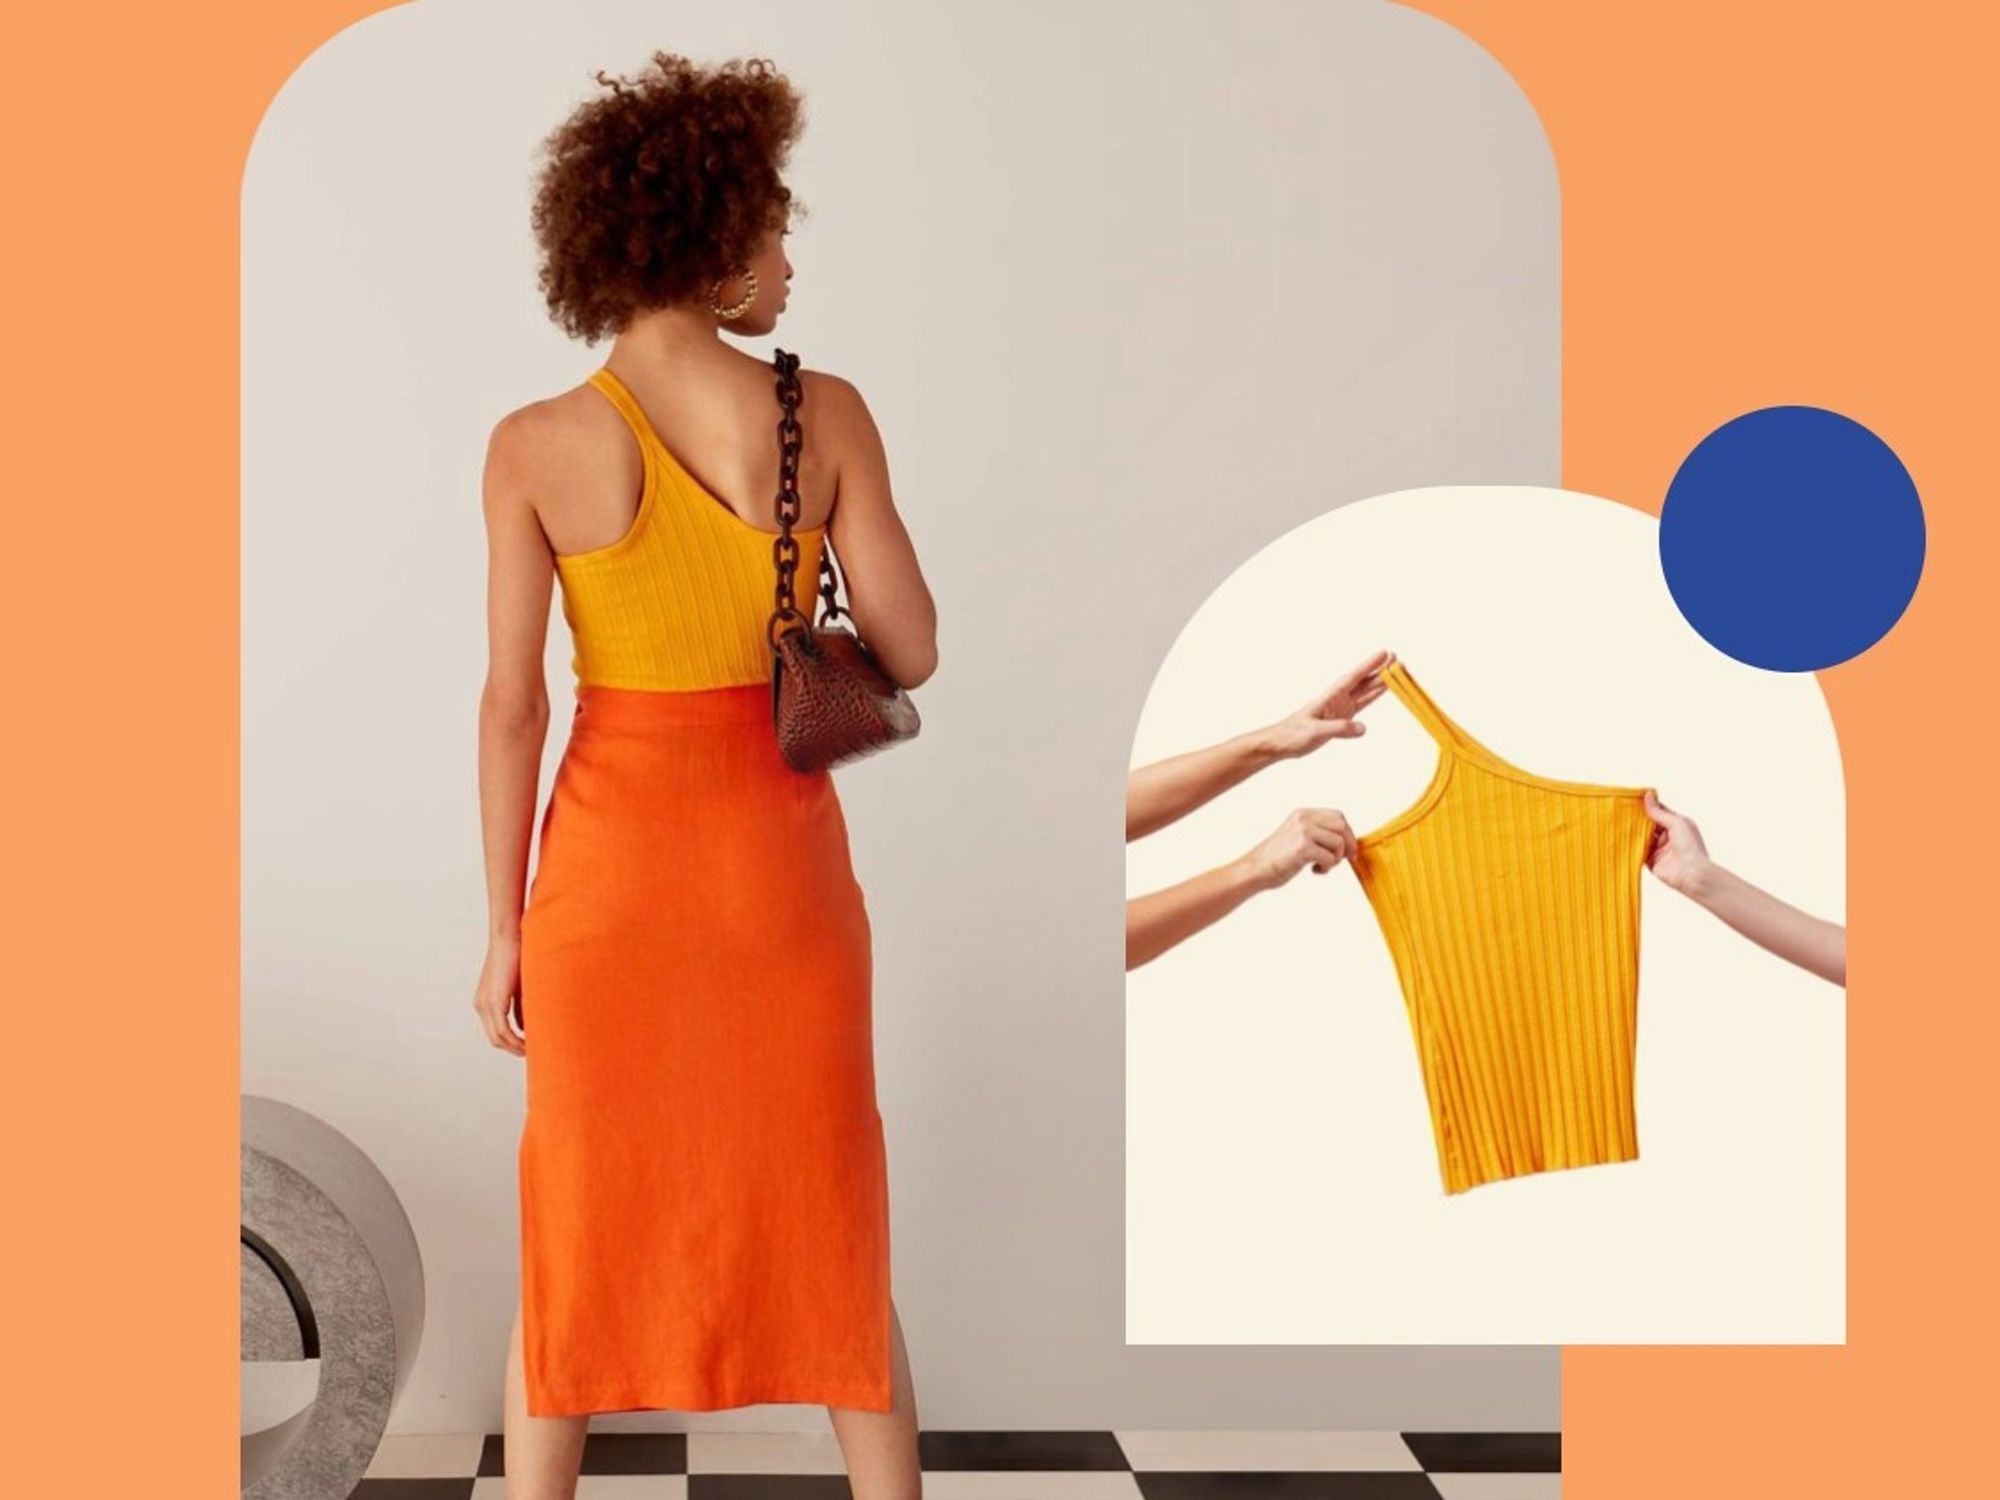 Former Nordstrom Exec Launches Behold, an AI-Powered Retailer Focused on 'Outfits'